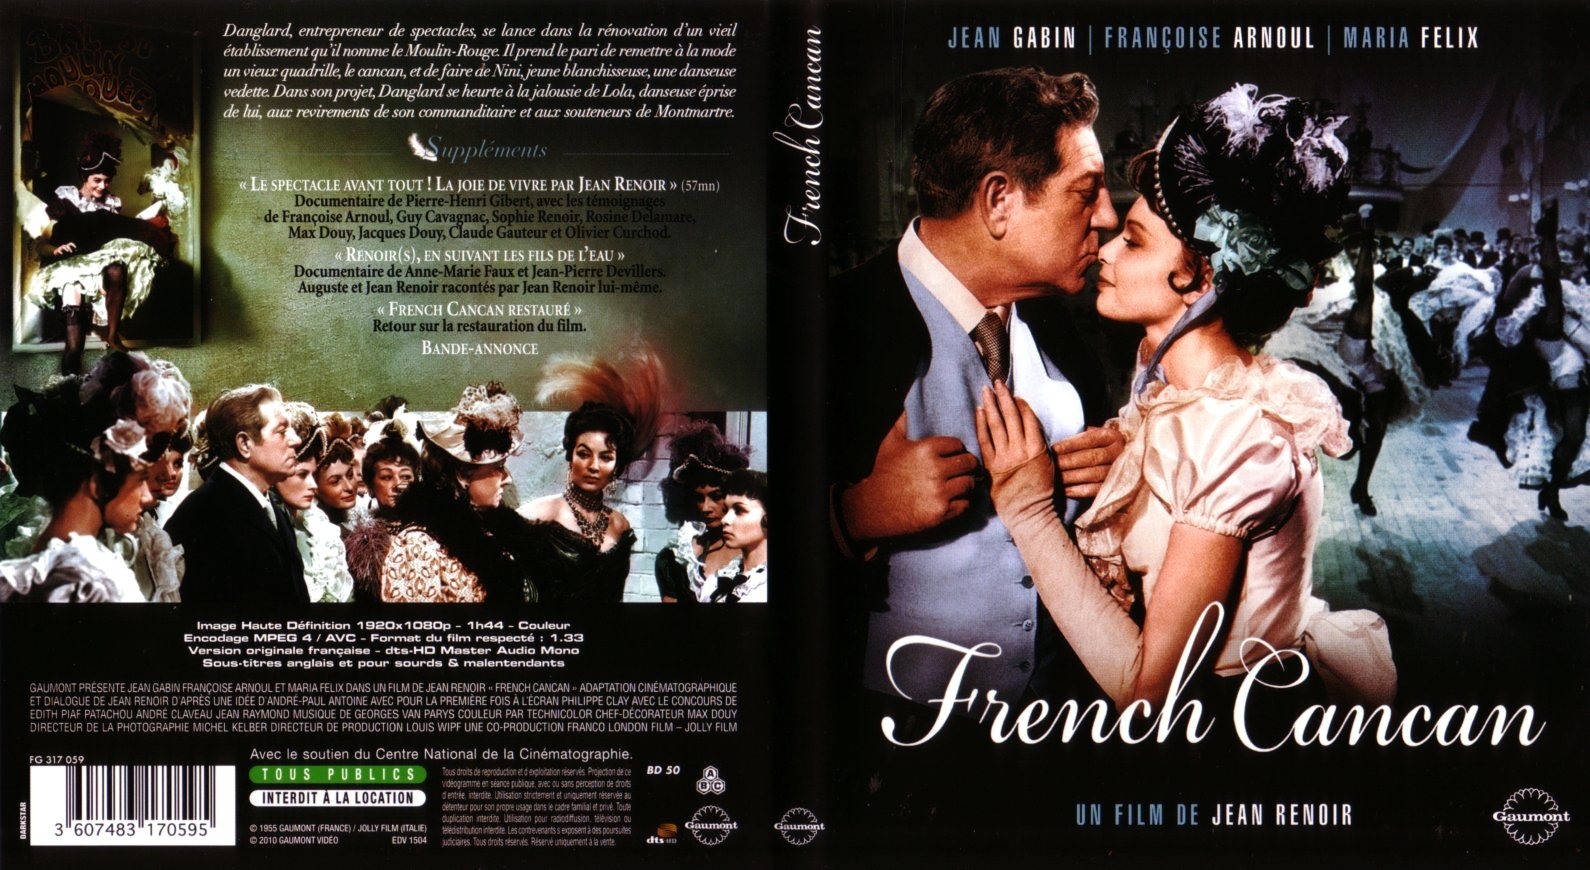 Jaquette DVD French cancan (BLU-RAY)